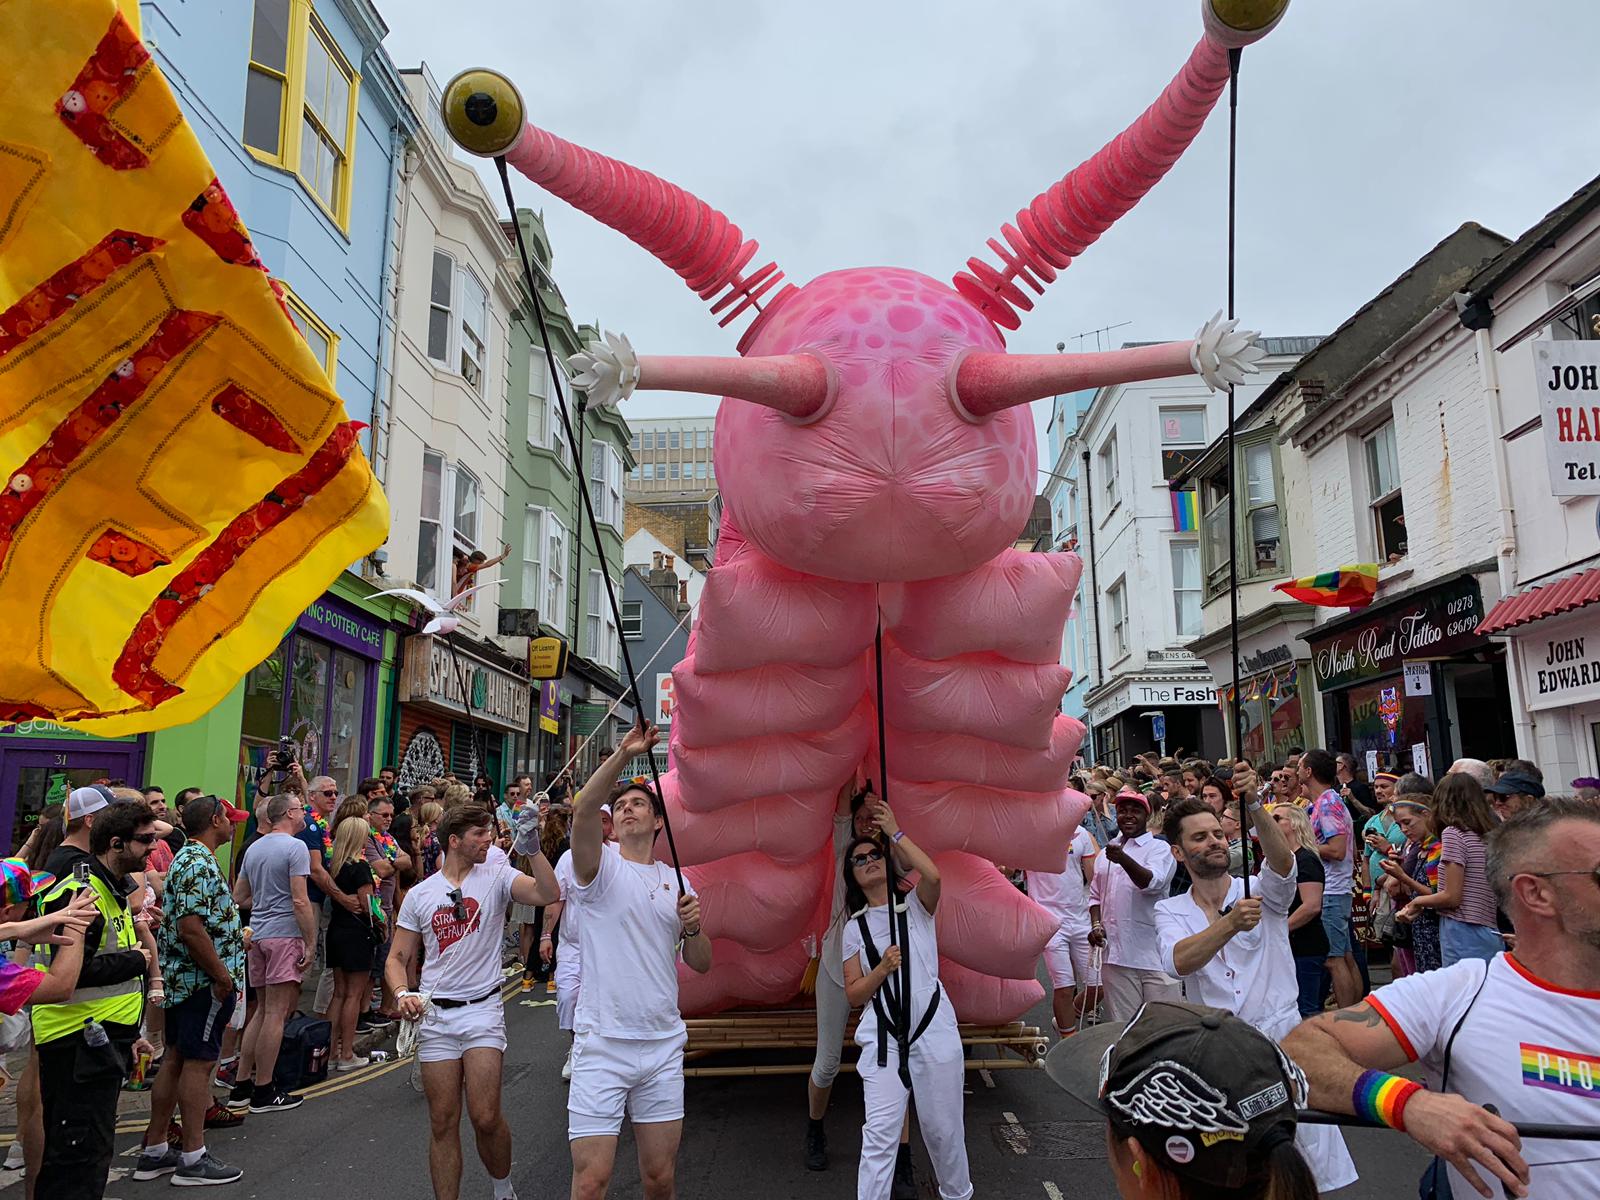 Numerous puppeteers support a giant puppet of a pink snail with a rainbow shell, moving it through a crowded street.